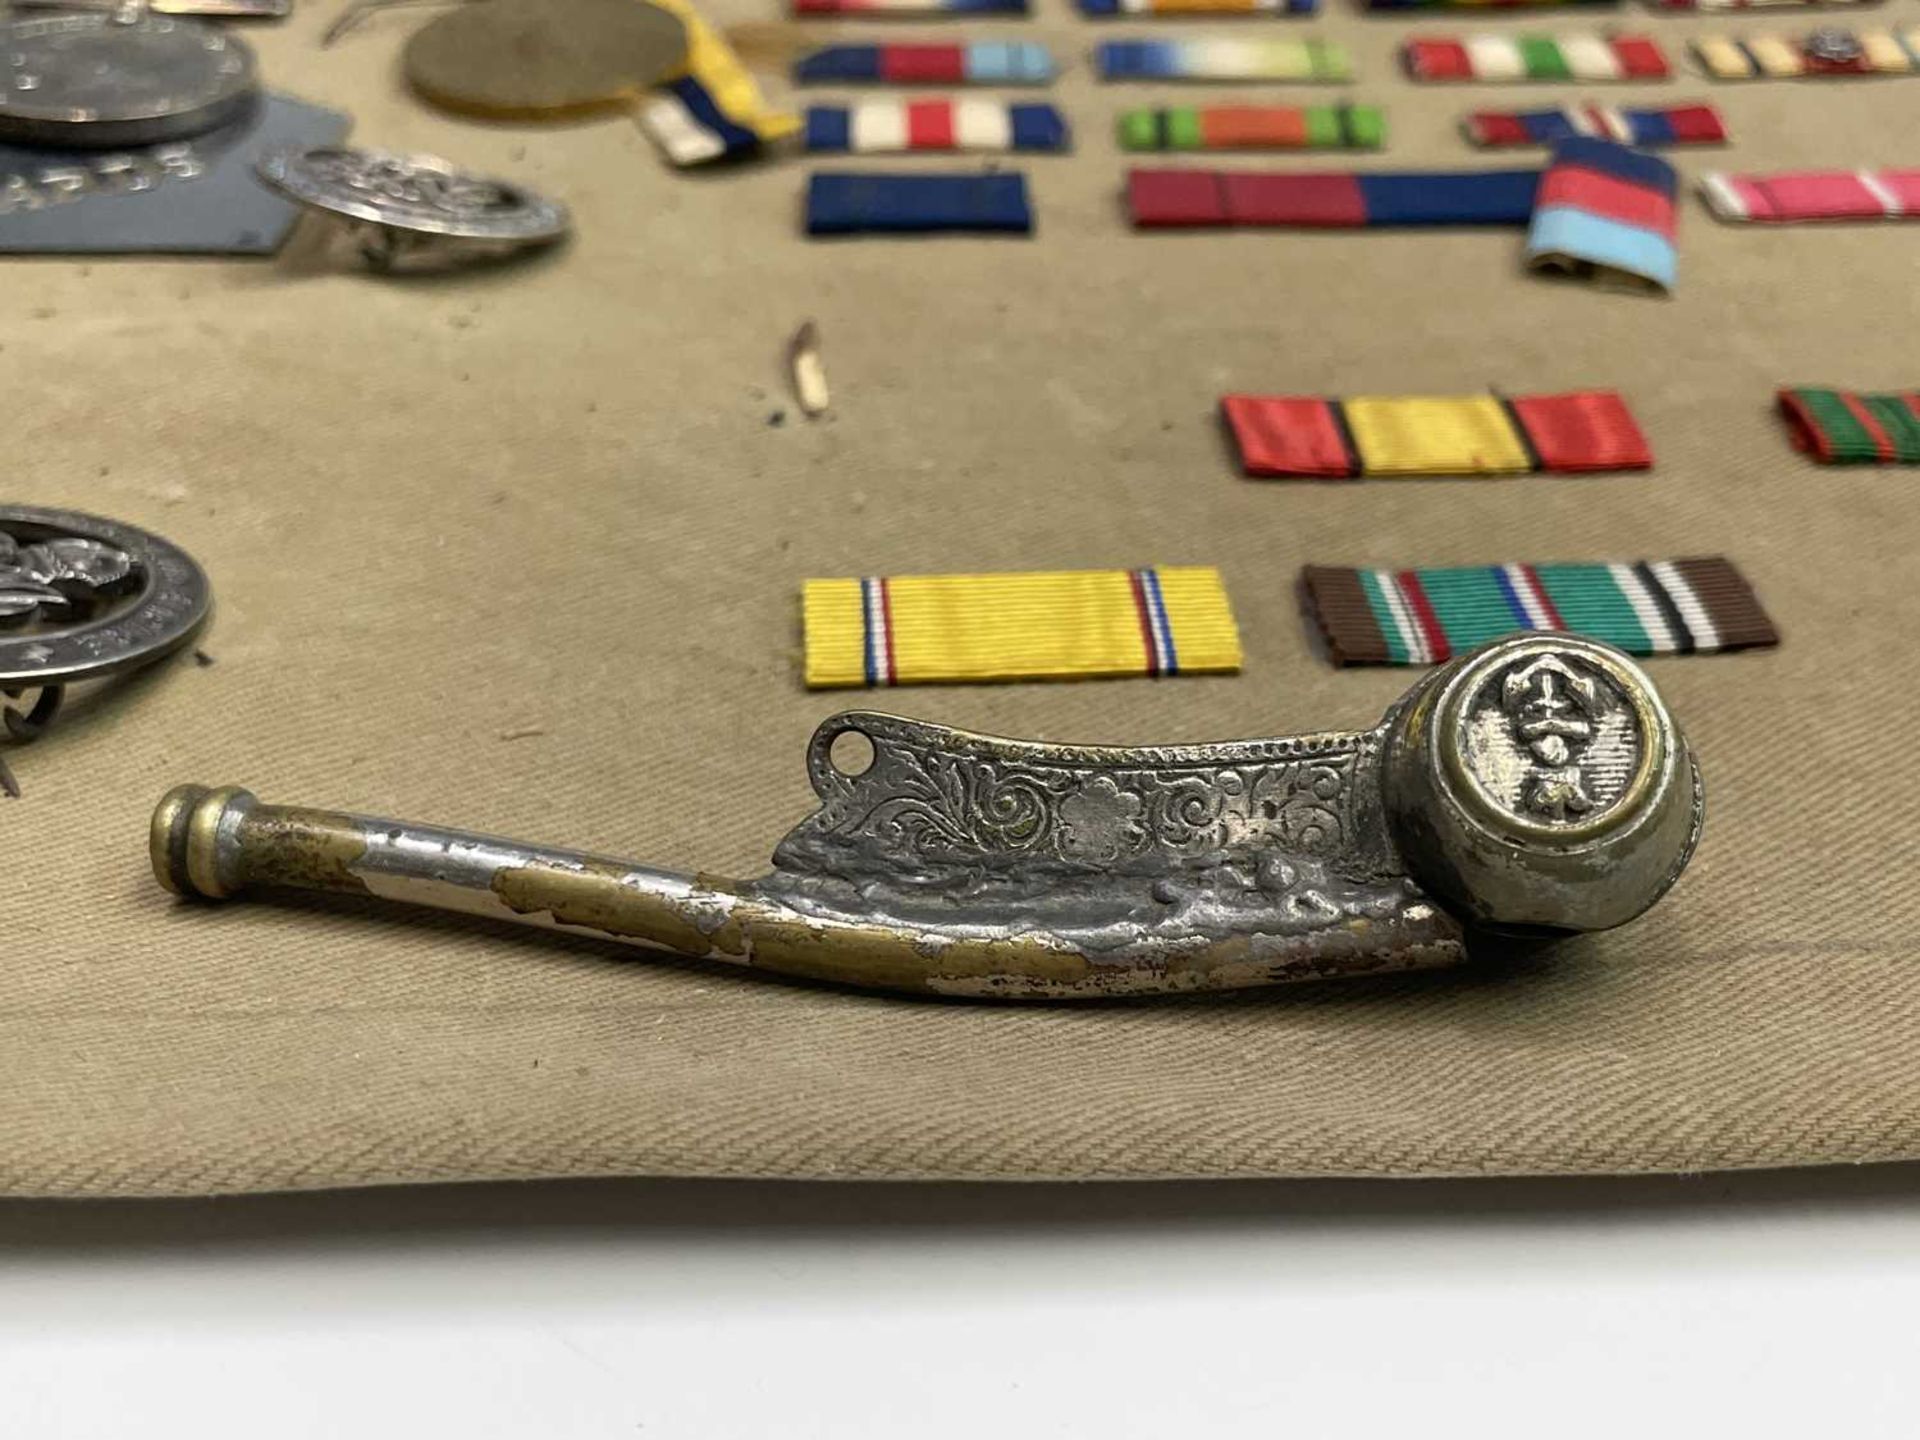 World War One Medals and Miscellaneous Military Items. Lot includes a 1914 Mons Star and Bar to - Image 7 of 13